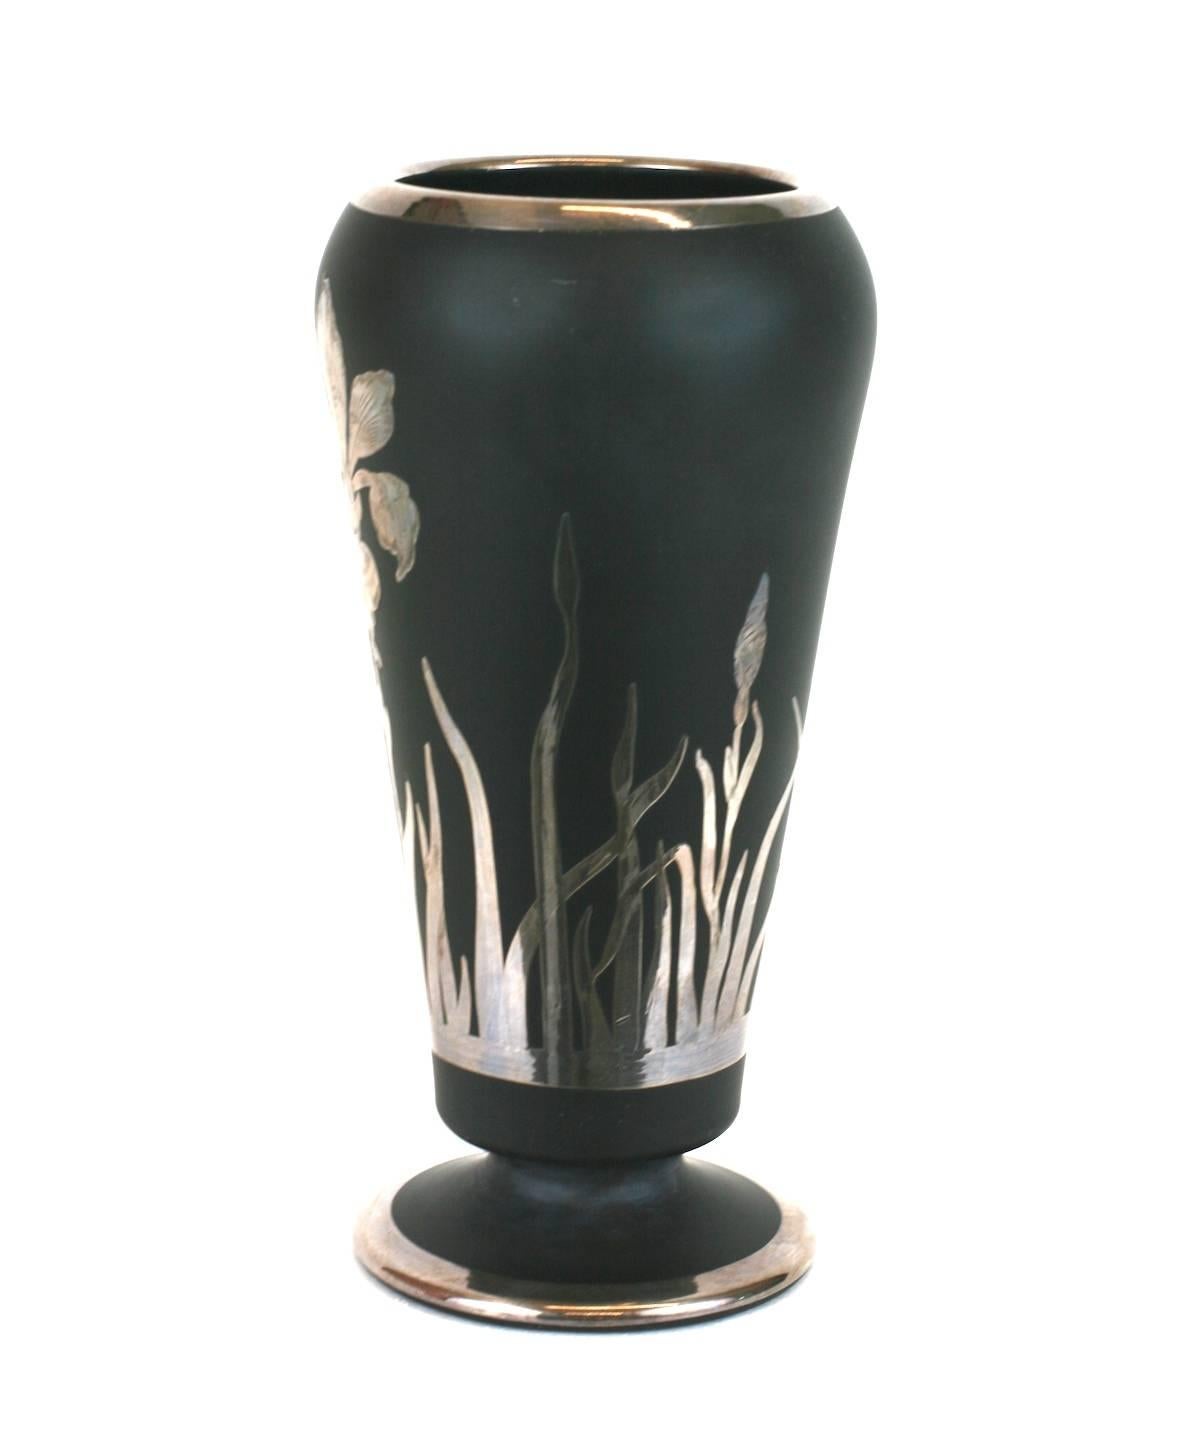 Lovely Art Deco silver overlay iris vase on matte black glass base circa 1930 by the Rockwell Silver Company of Meriden Ct. Elaborate etch work in sterling silver overlay of a central iris motif with leaves emanating from base.
Signed 